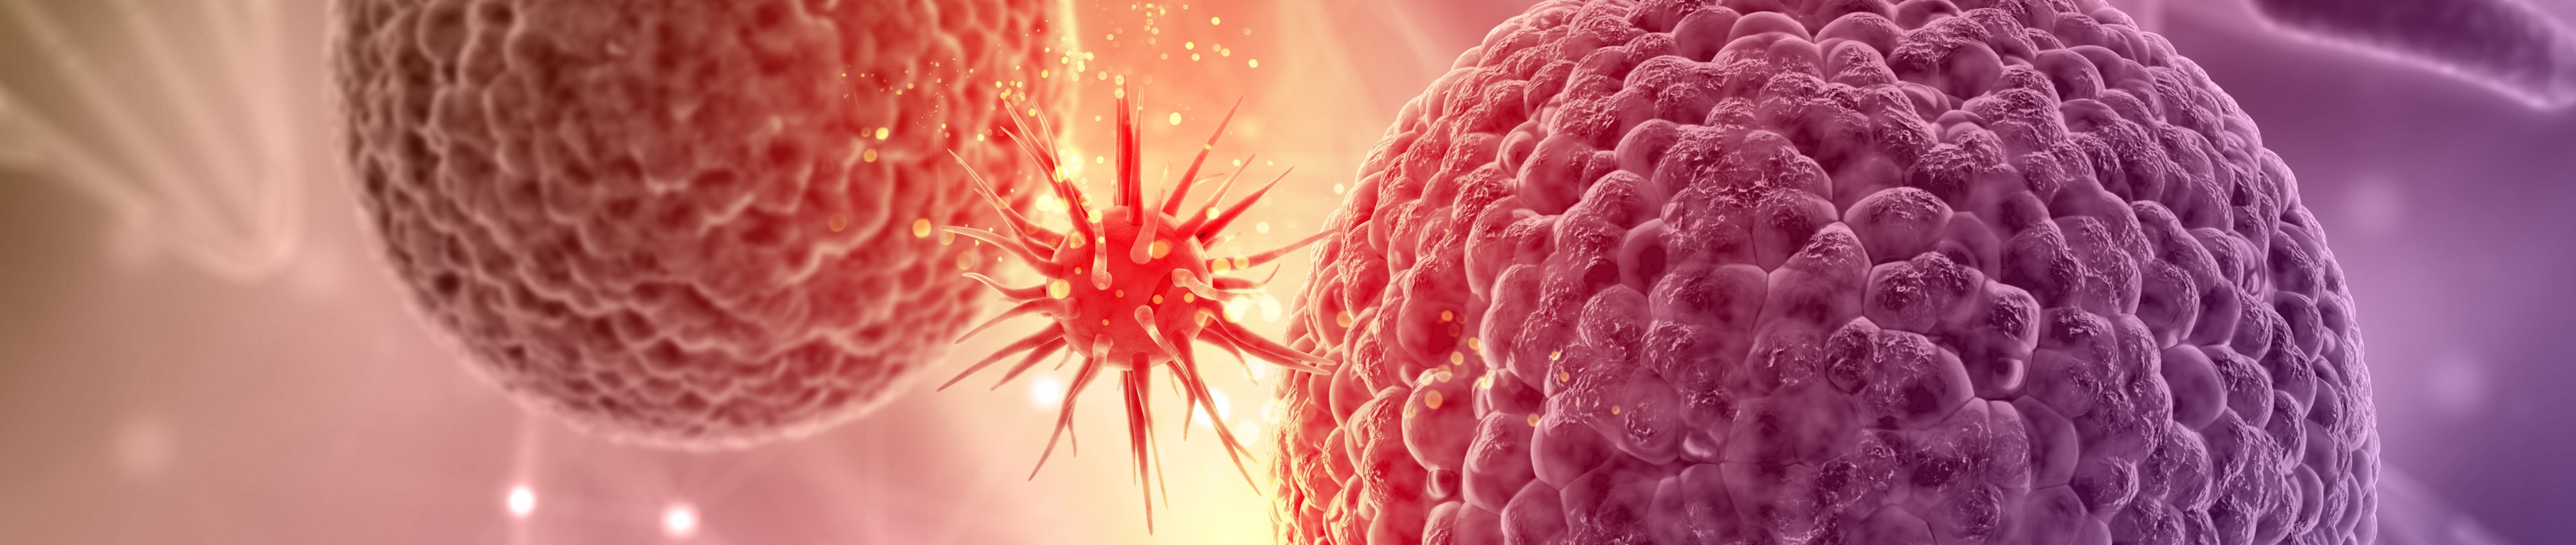 3D render of a medical background with a virus cell attacking another